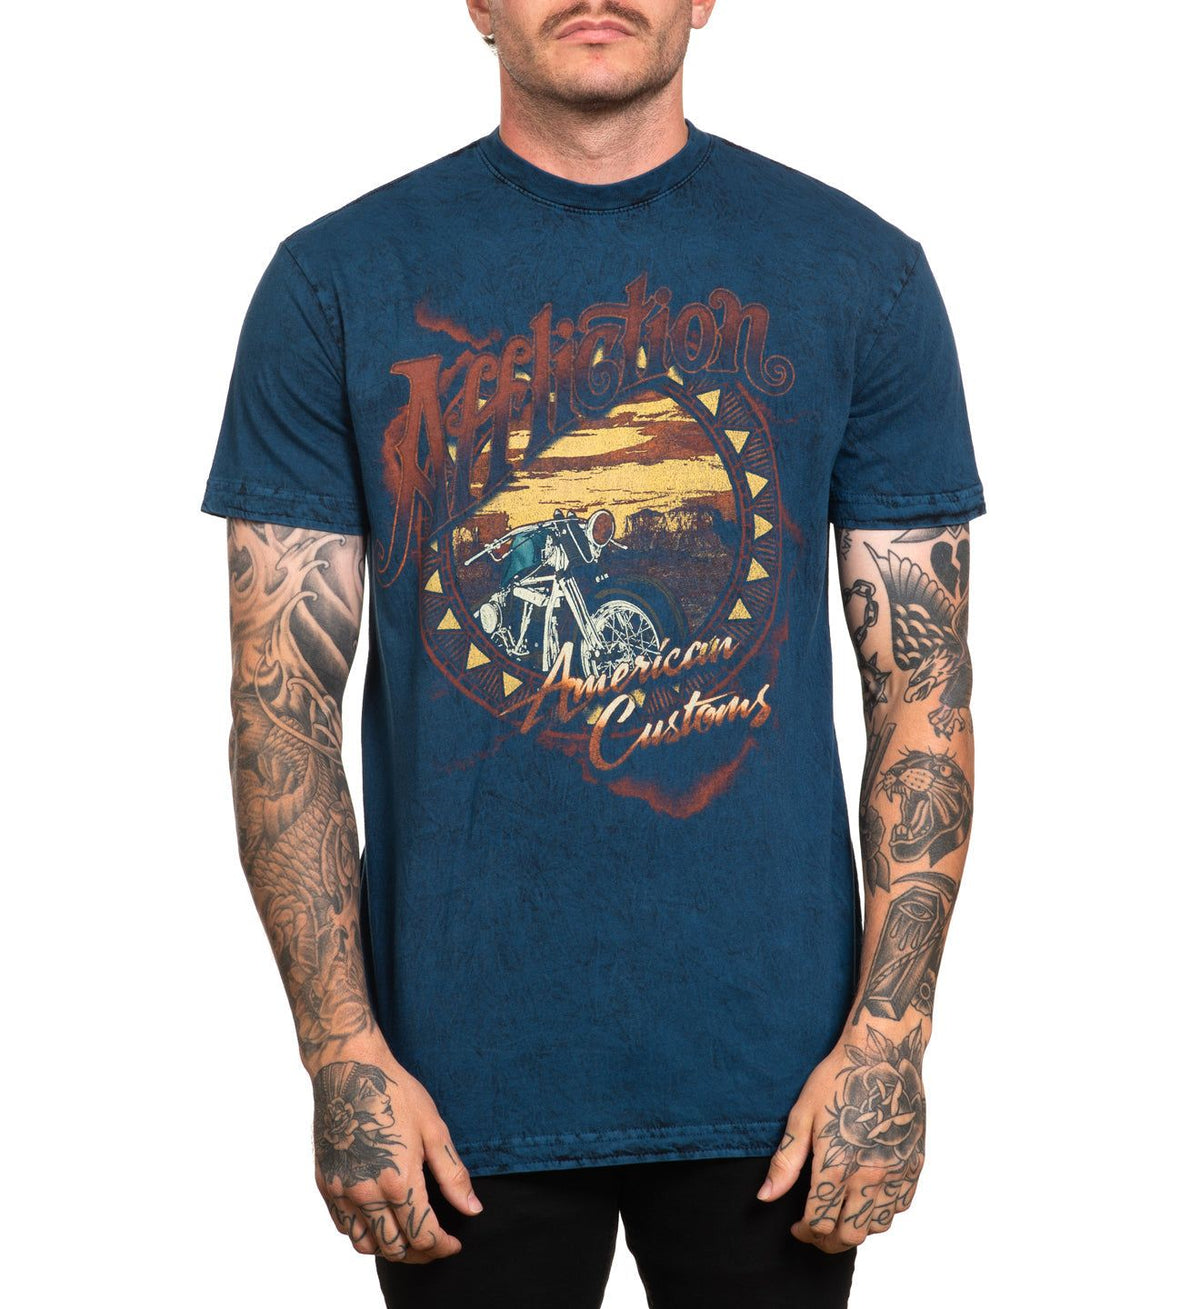 Lets Ride - Affliction Clothing